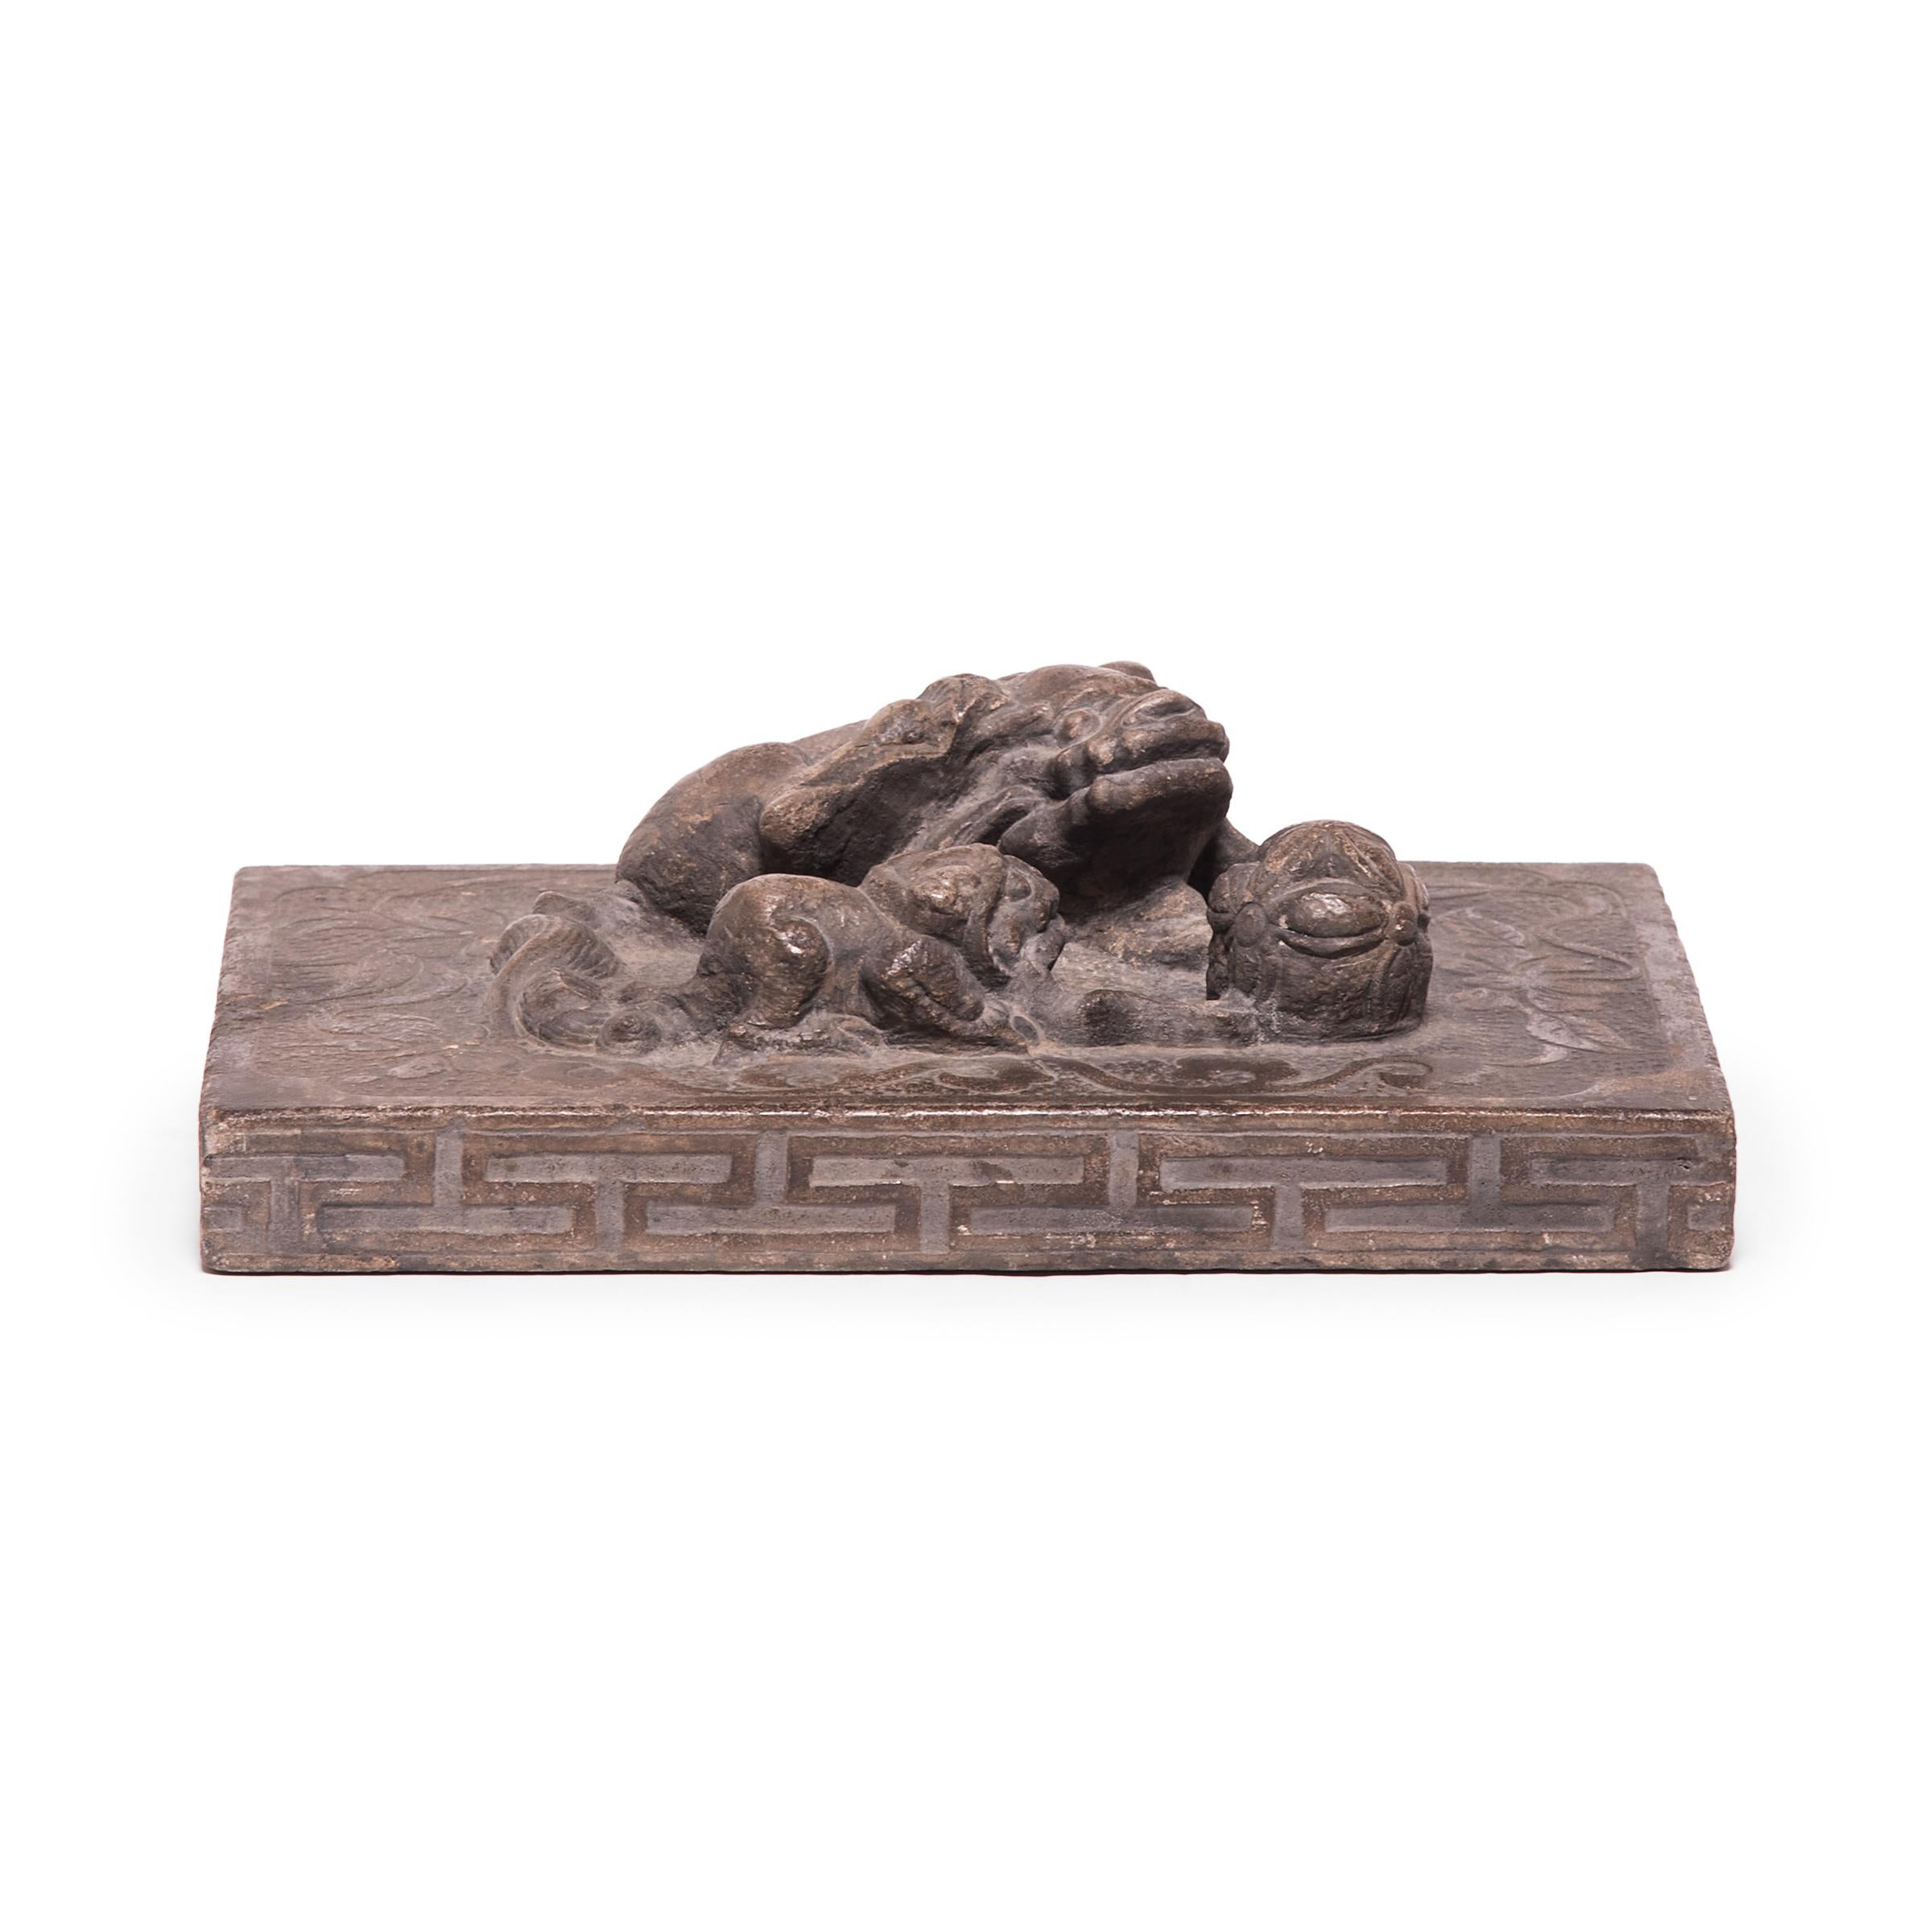 Carved from a solid piece of stone, this weight was originally used by a Shoemaker to press down large pieces of leather. Surrounded by intricate scrollwork and peony blossoms, a guardian fu dog lies beside her cub, each biting the thread of an